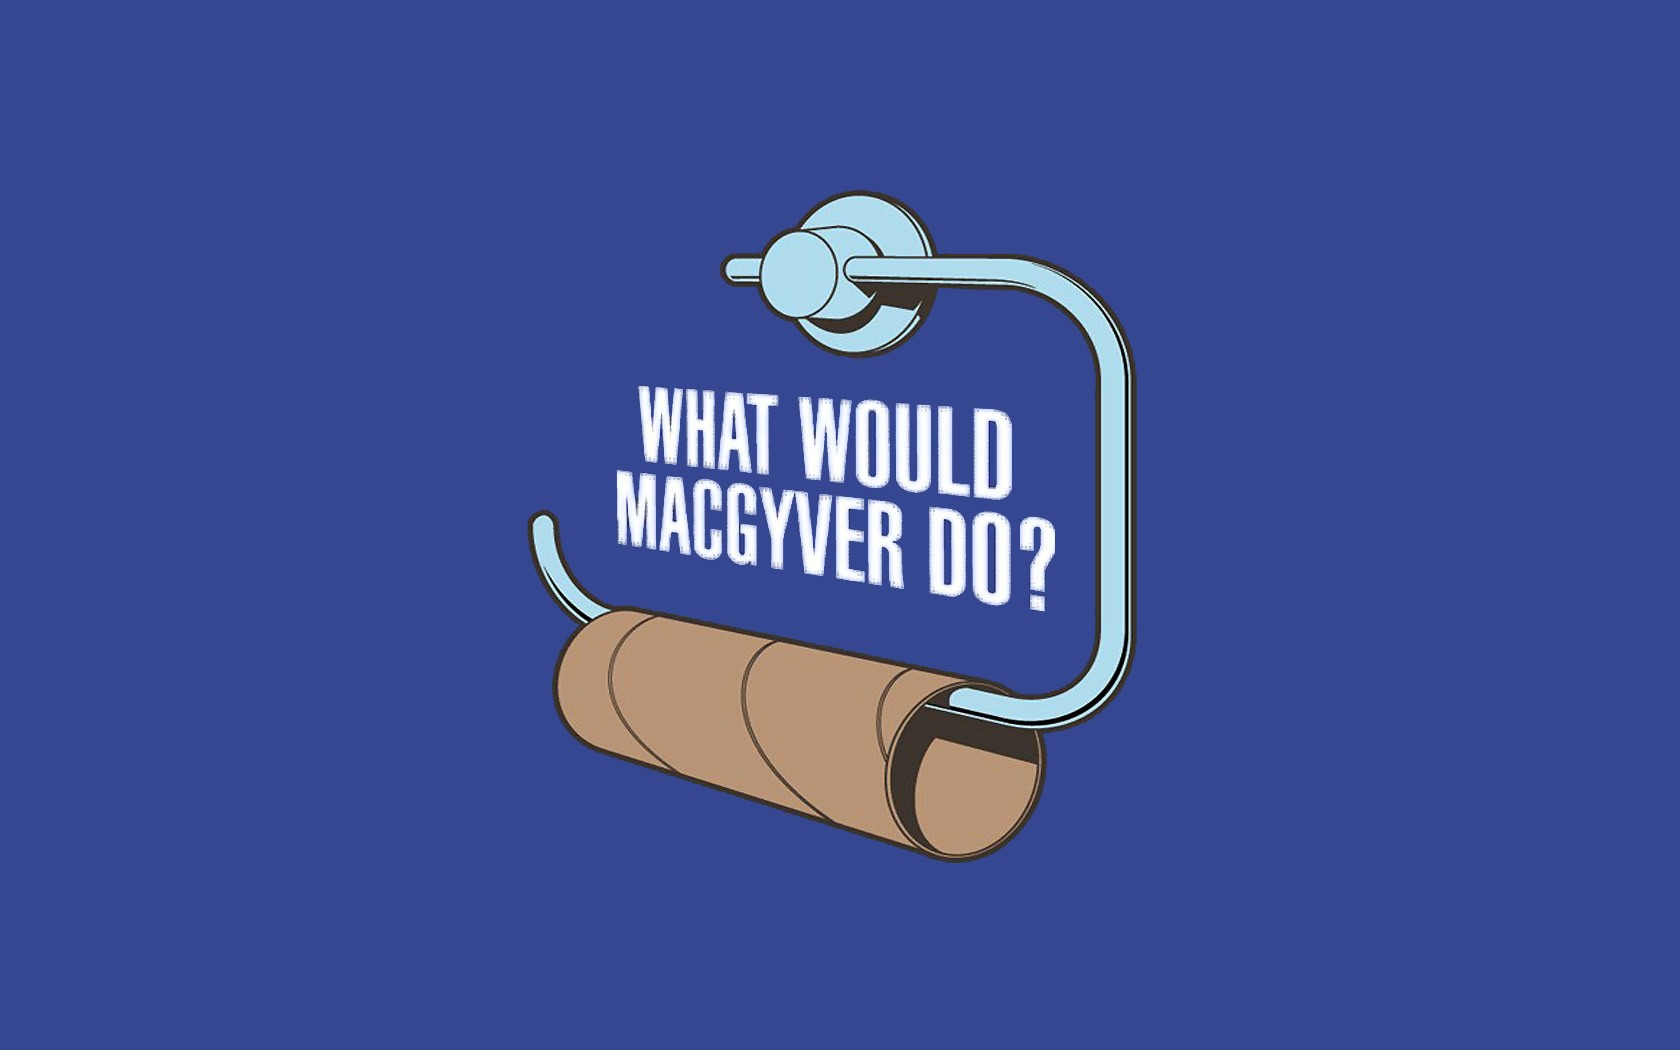 General 1680x1050 macgyver humor toilet paper simple background blue background